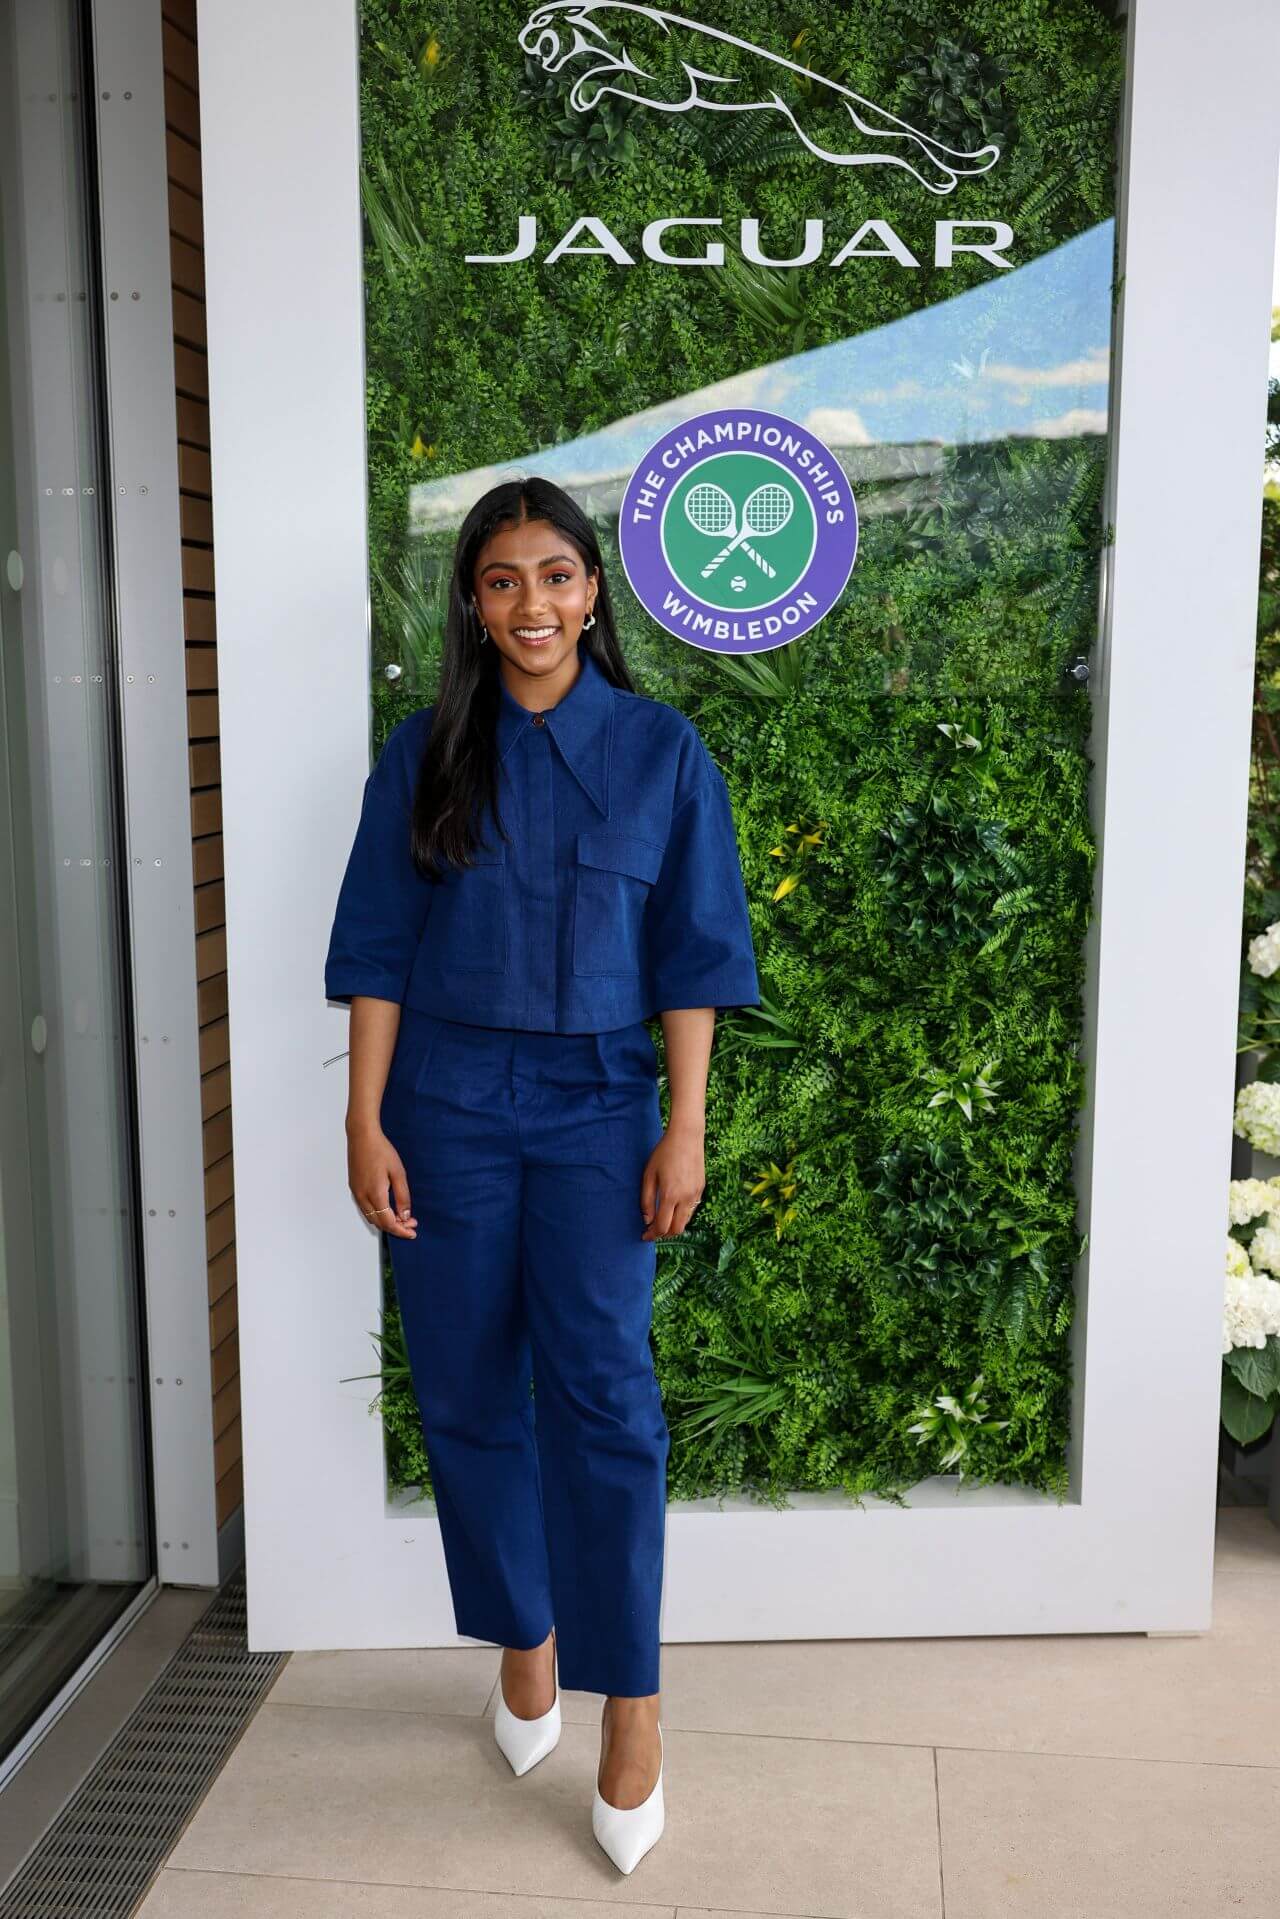 Charithra Chandran In Blue Denim Dress At Jaguar Suite During The Championships  Wimbledon in London